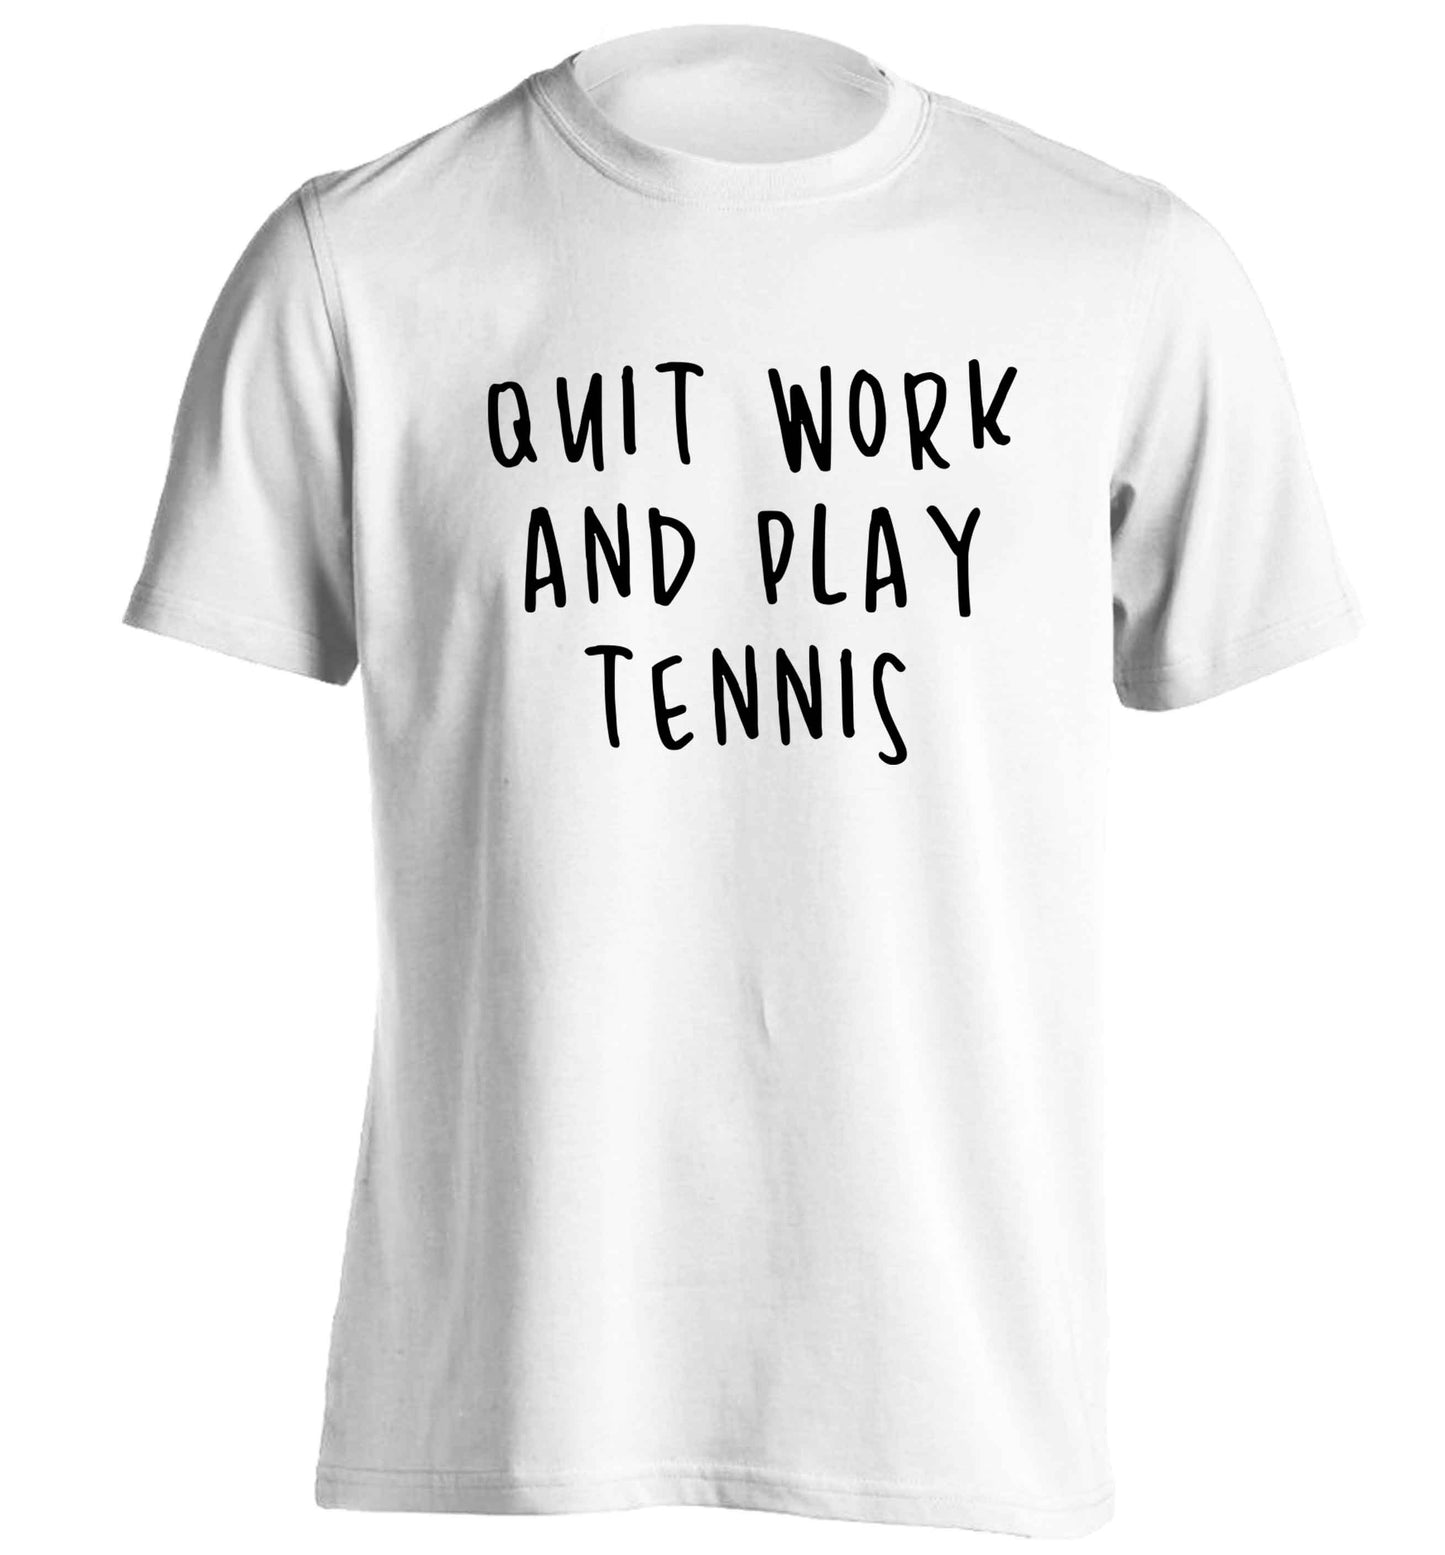 Quit work and play tennis adults unisex white Tshirt 2XL